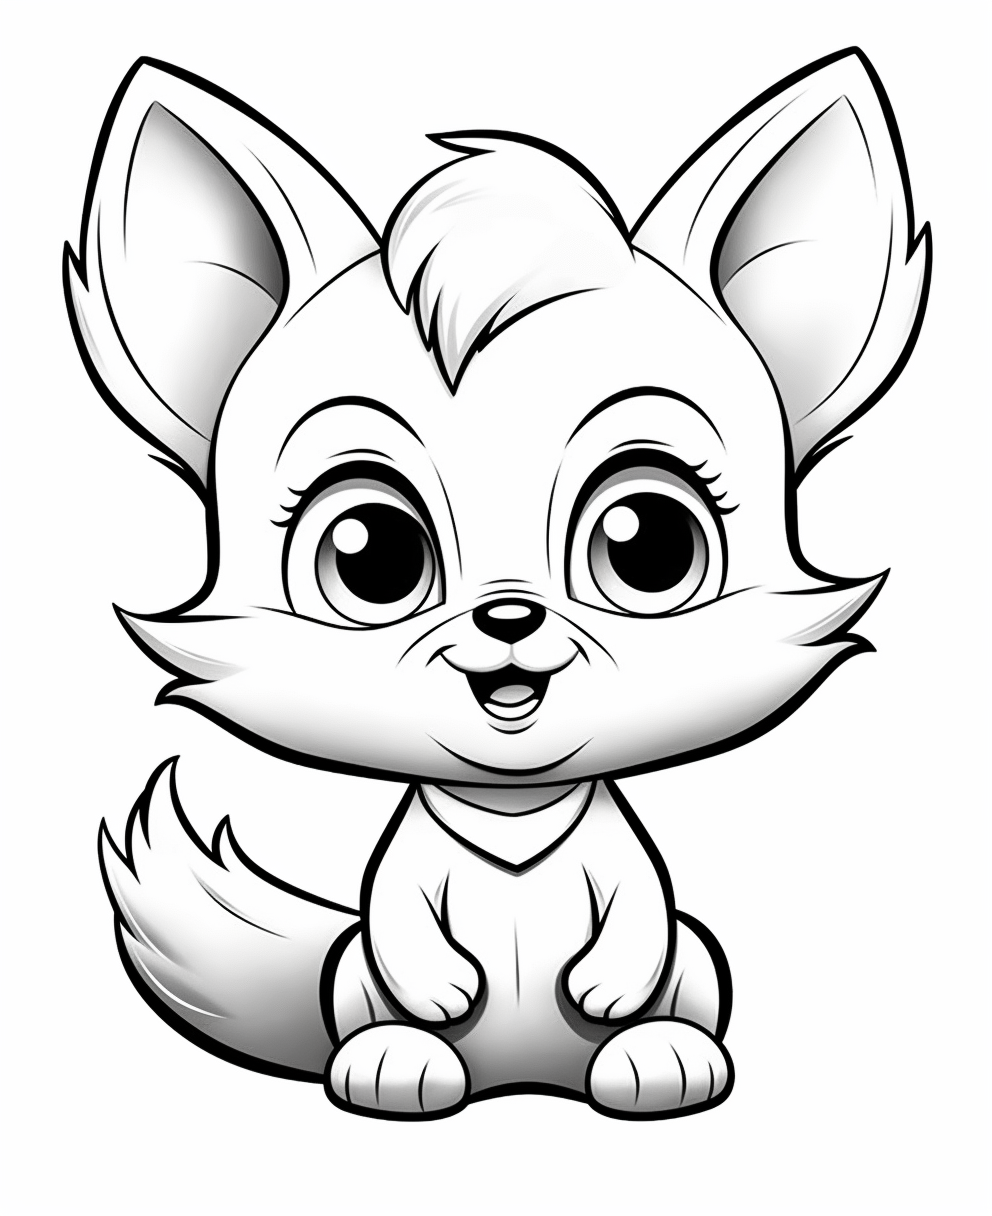 Fox coloring books for children coloring pages